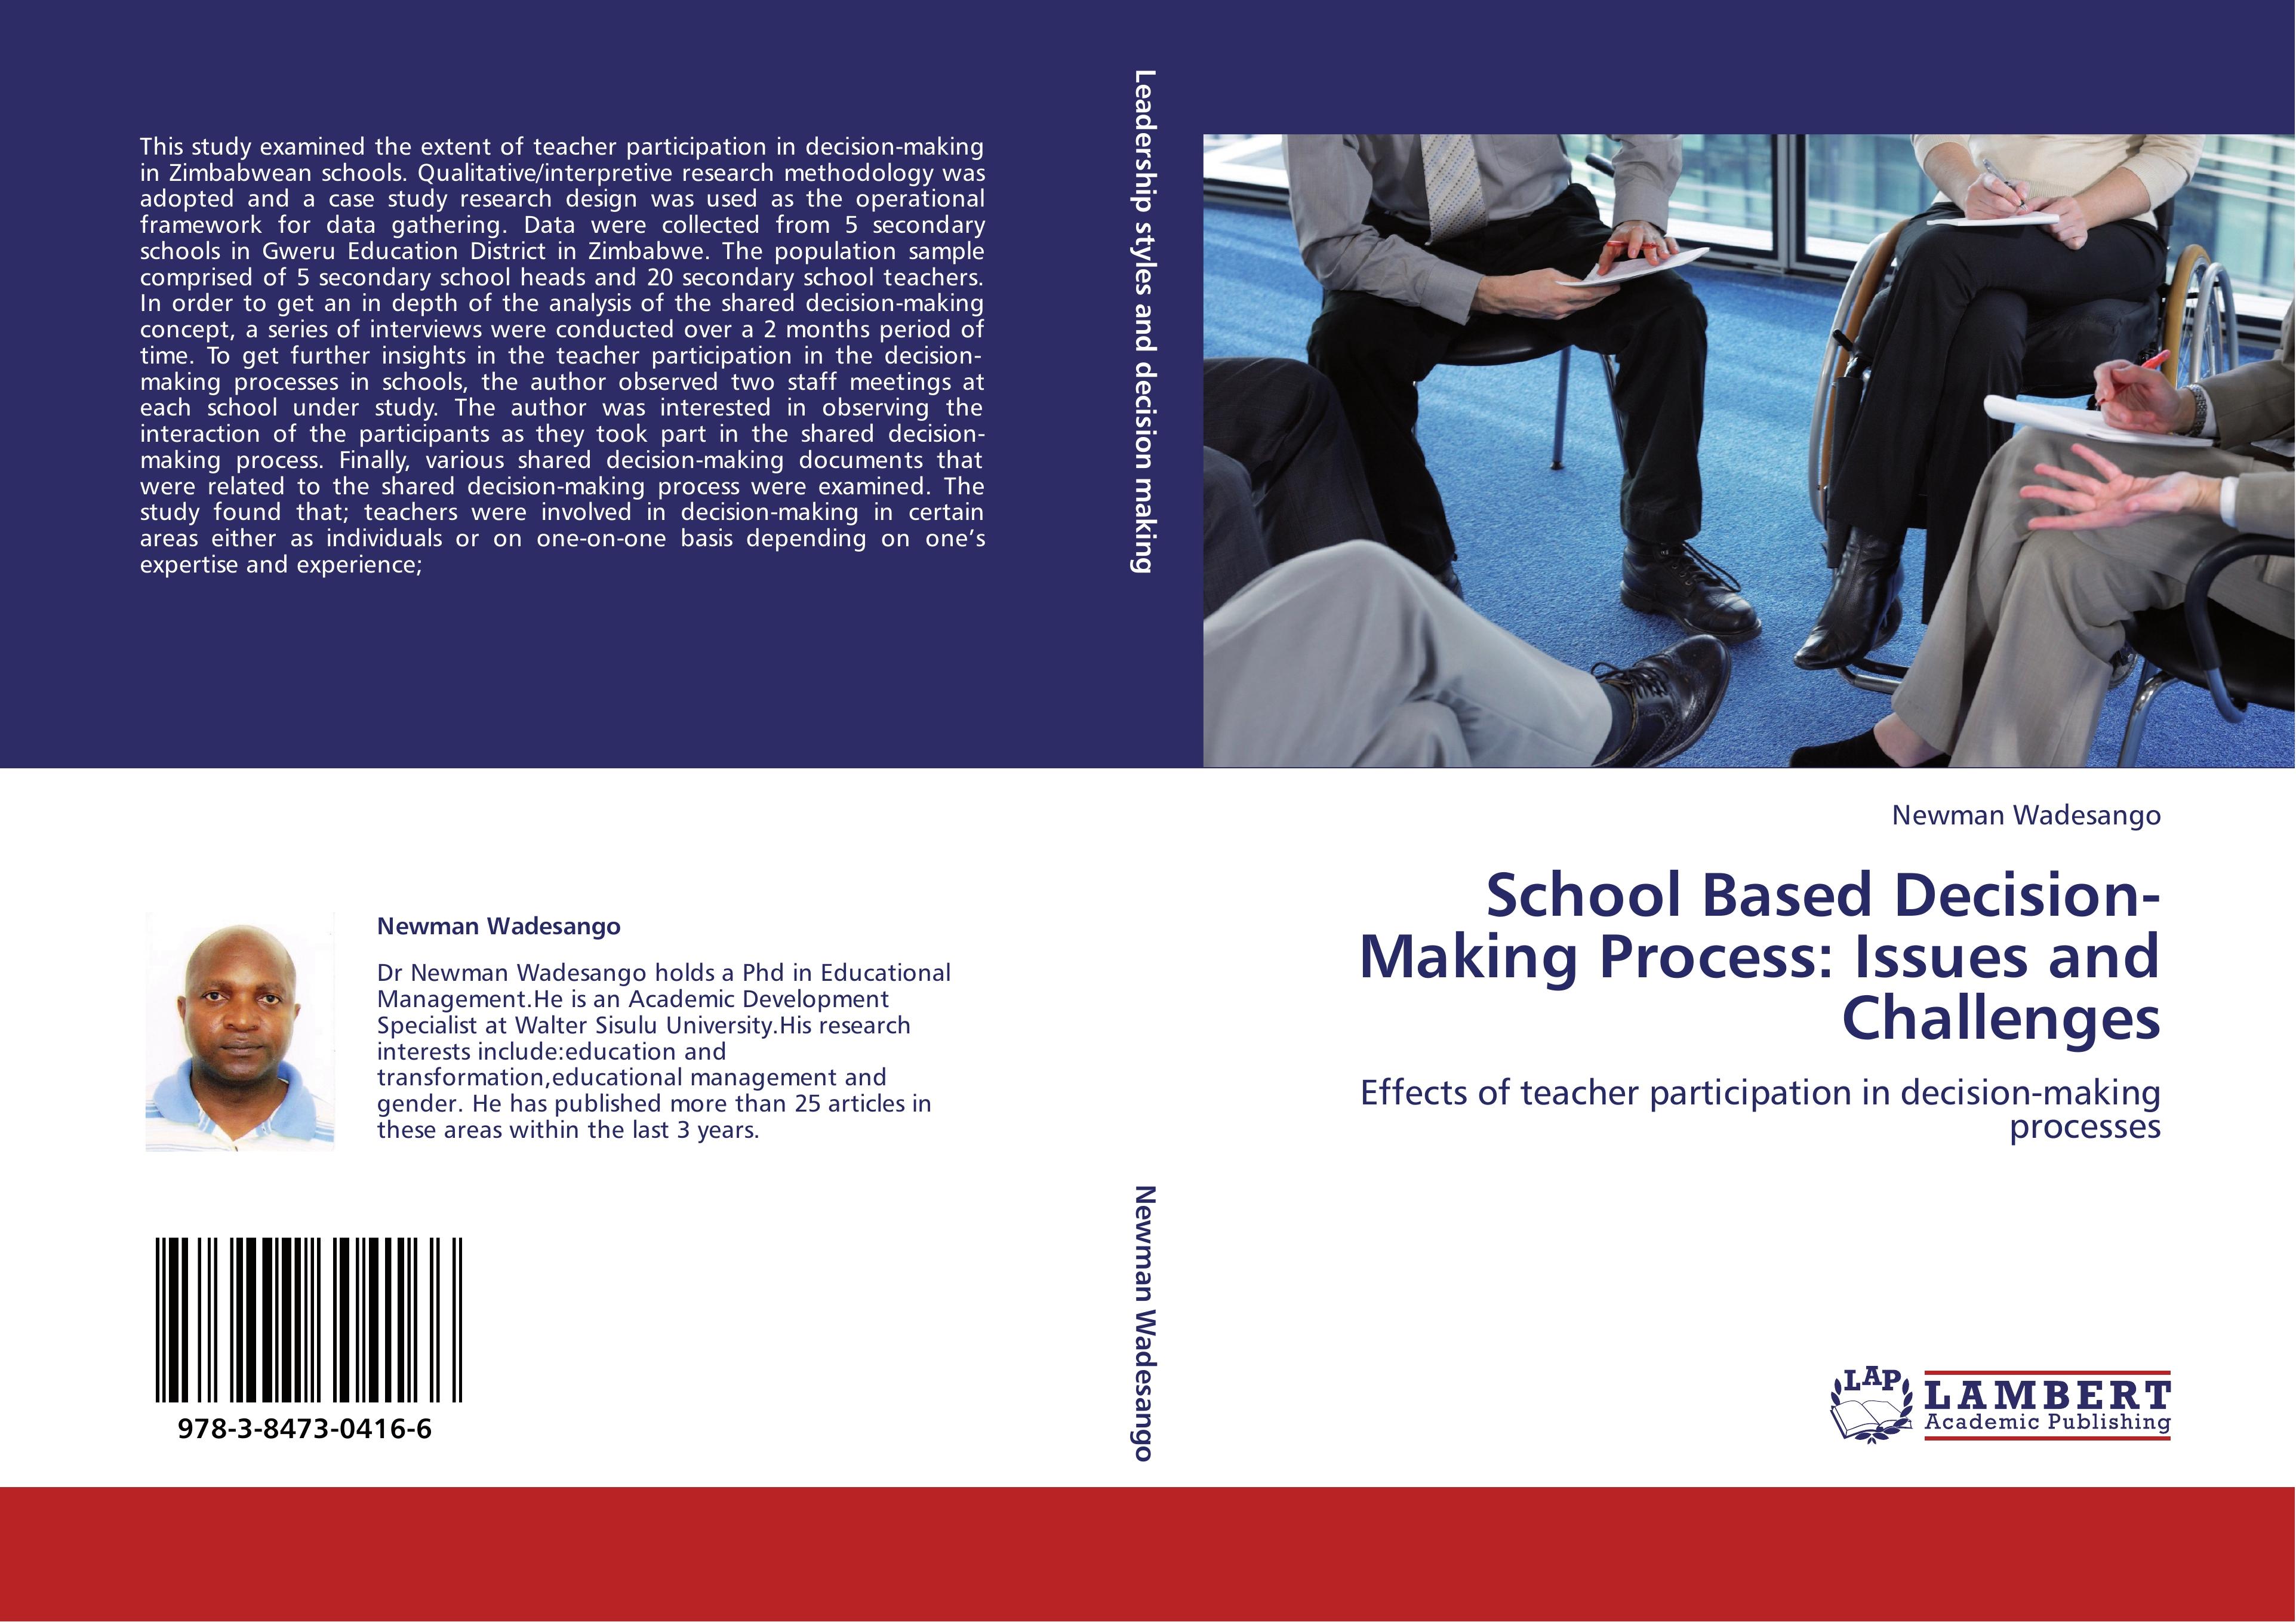 School Based Decision-Making Process: Issues and Challenges - Wadesango, Newman